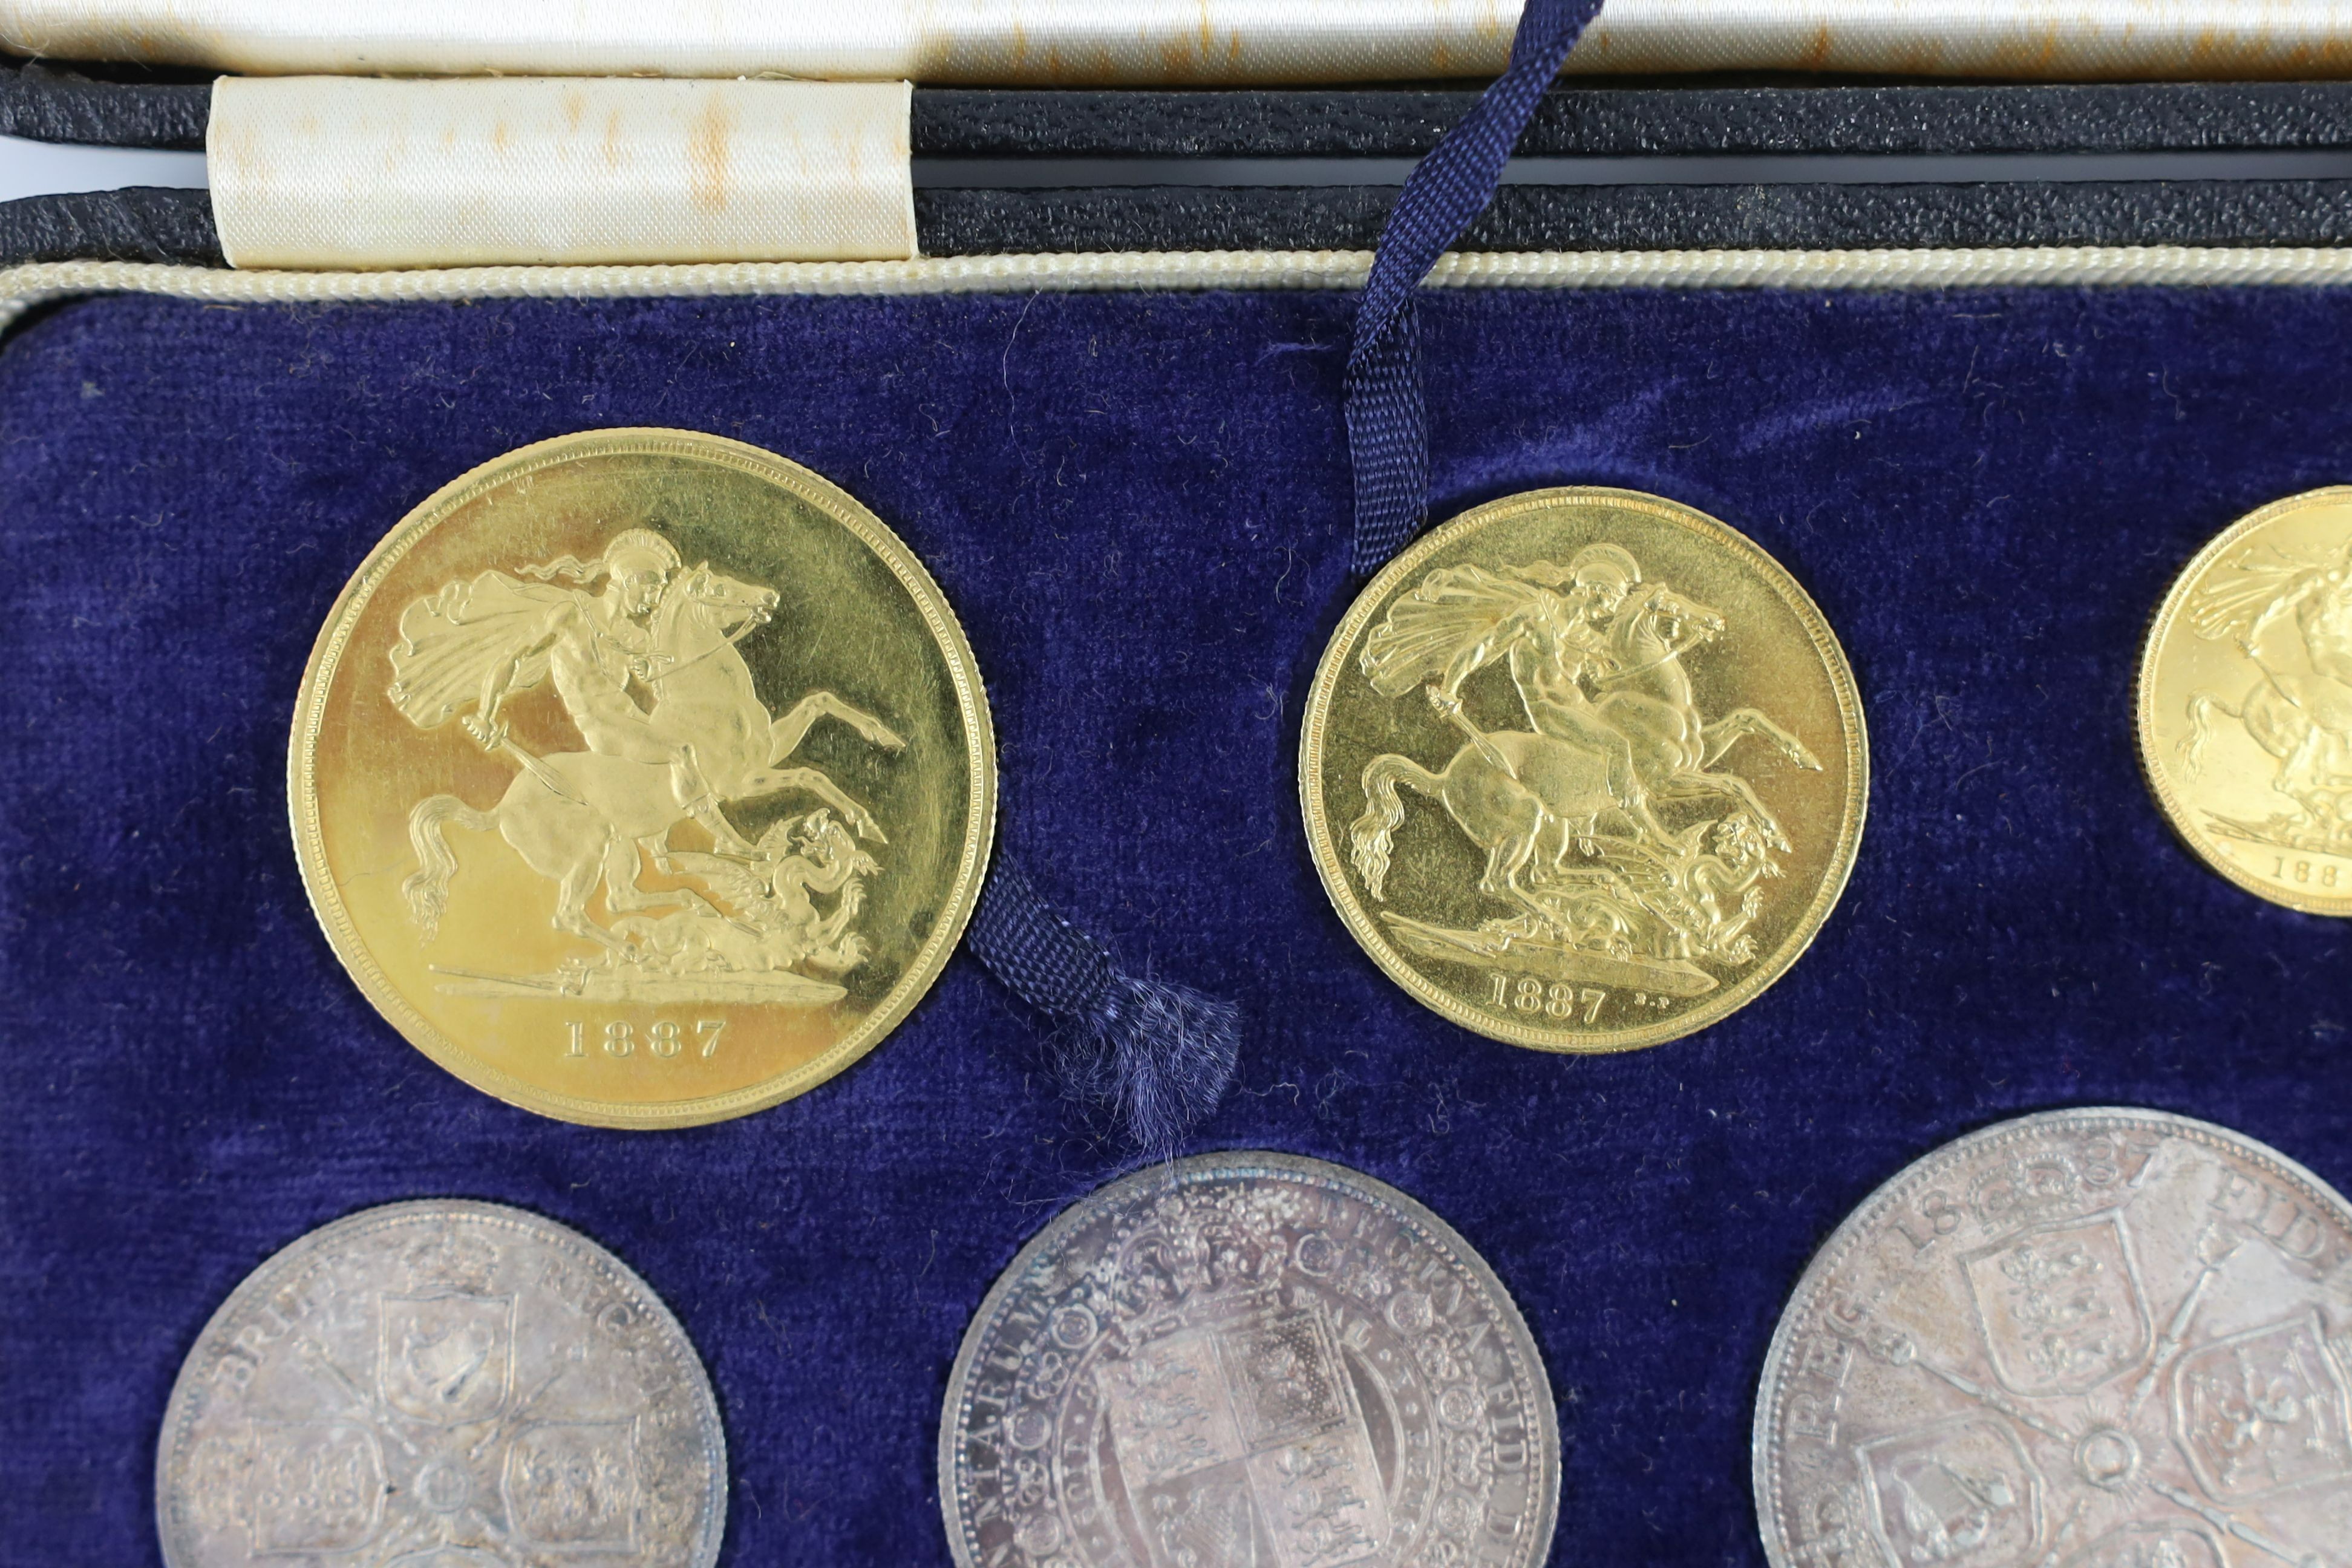 PLEASE NOTE THIS IS A SPECIMEN SET, UK coins, a cased Victoria 1887 Golden Jubilee gold and silver eleven coin set.